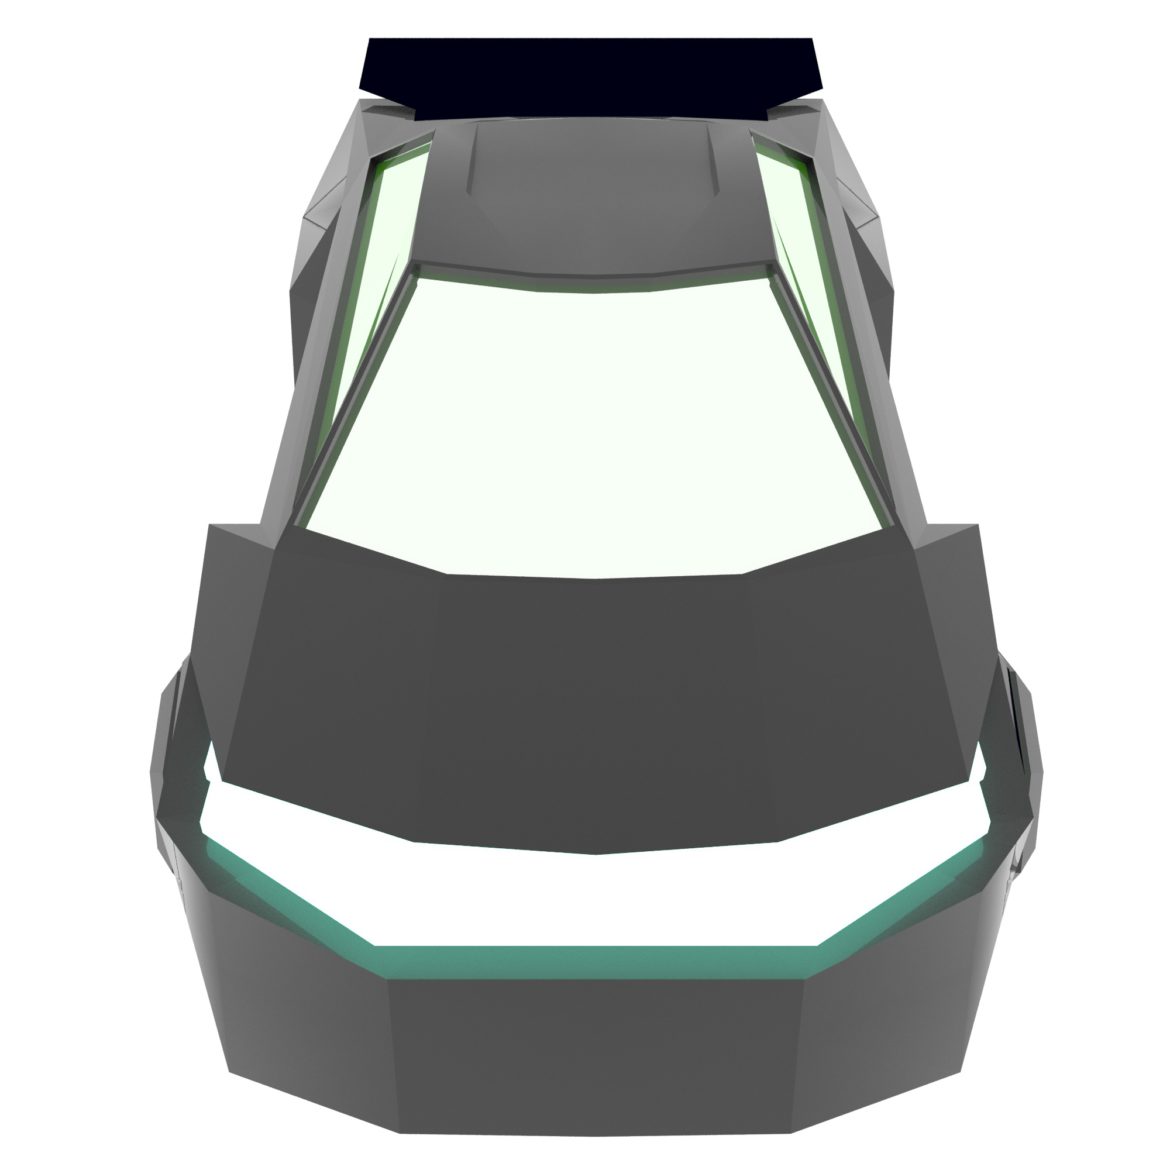  <a class="continue" href="https://www.flatpyramid.com/3d-models/vehicles-3d-models/watercraft/other/neon-car-2/">Continue Reading<span> Neon car</span></a>